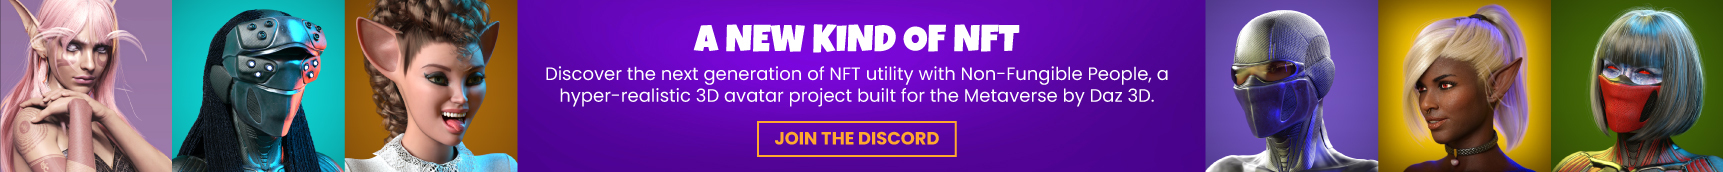 A New Kind of NFT